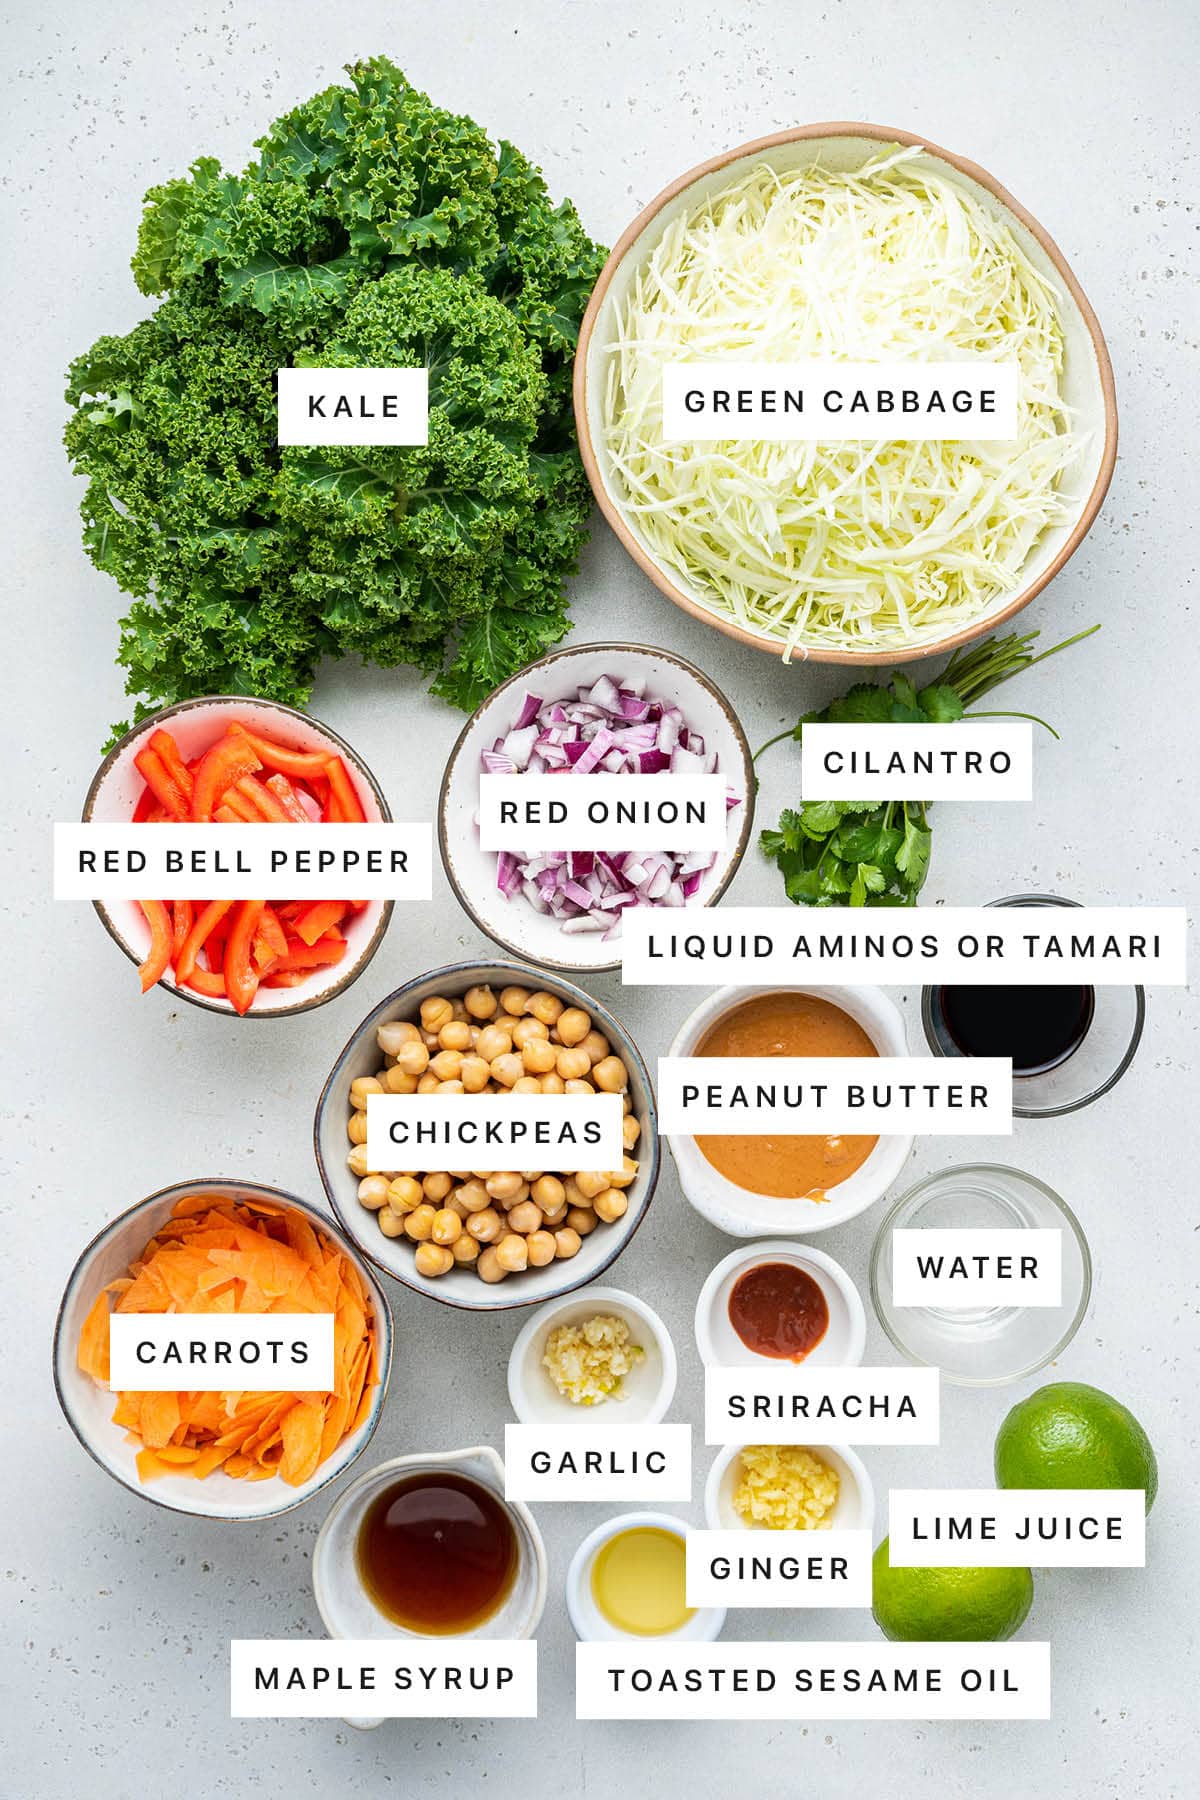 Ingredients measured out to make Kale & Cabbage Pad Thai Salad: kale, green cabbage, red bell pepper, red onion, cilantro, liquid aminos or tamari, chickpeas, peanut butter, carrots, garlic, sriracha, water, maple syrup, ginger, toasted sesame oil and lime juice.